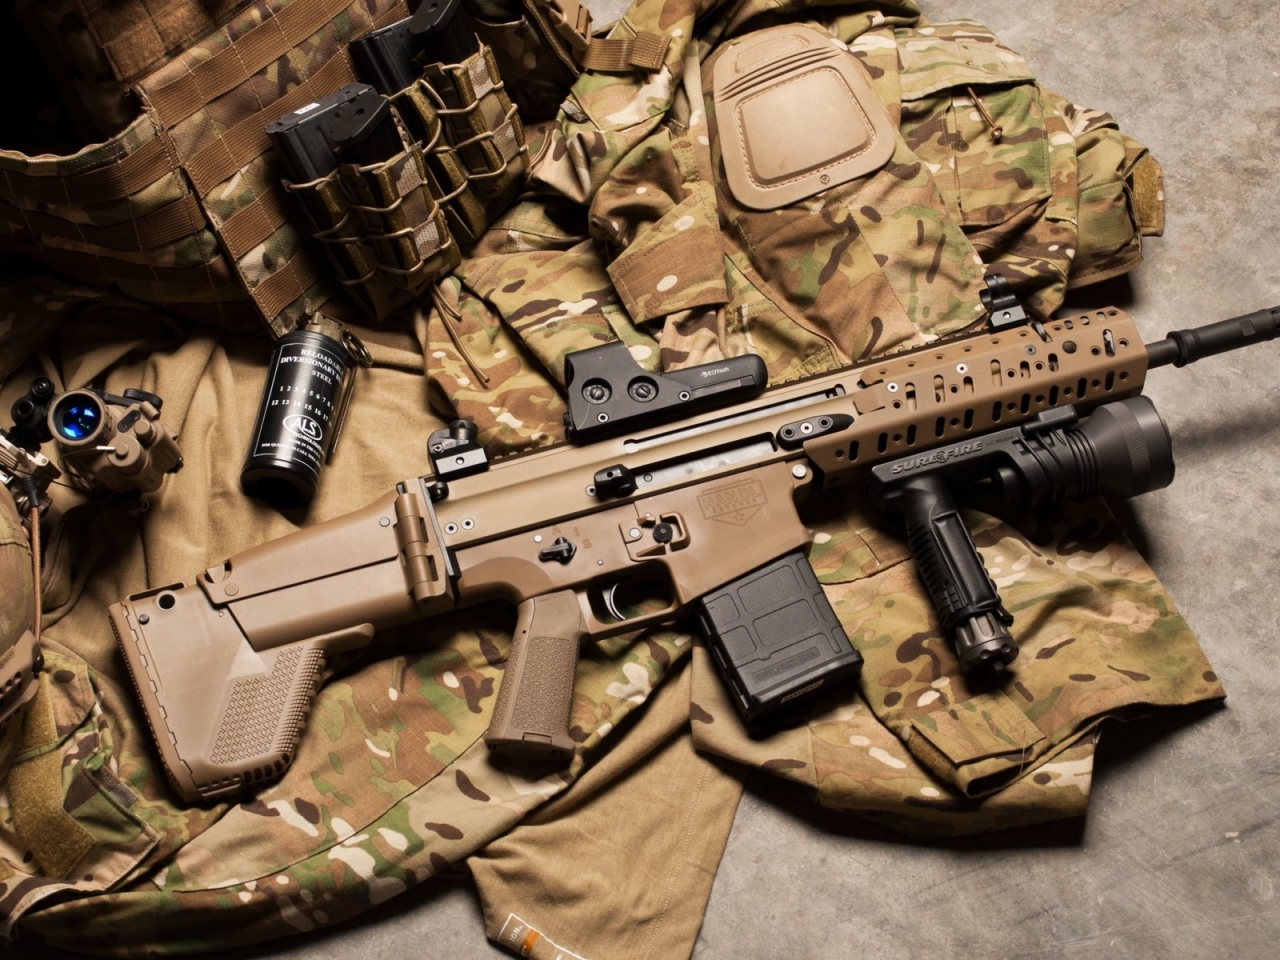 FN Scar Assault Rifle for 1280 x 960 resolution